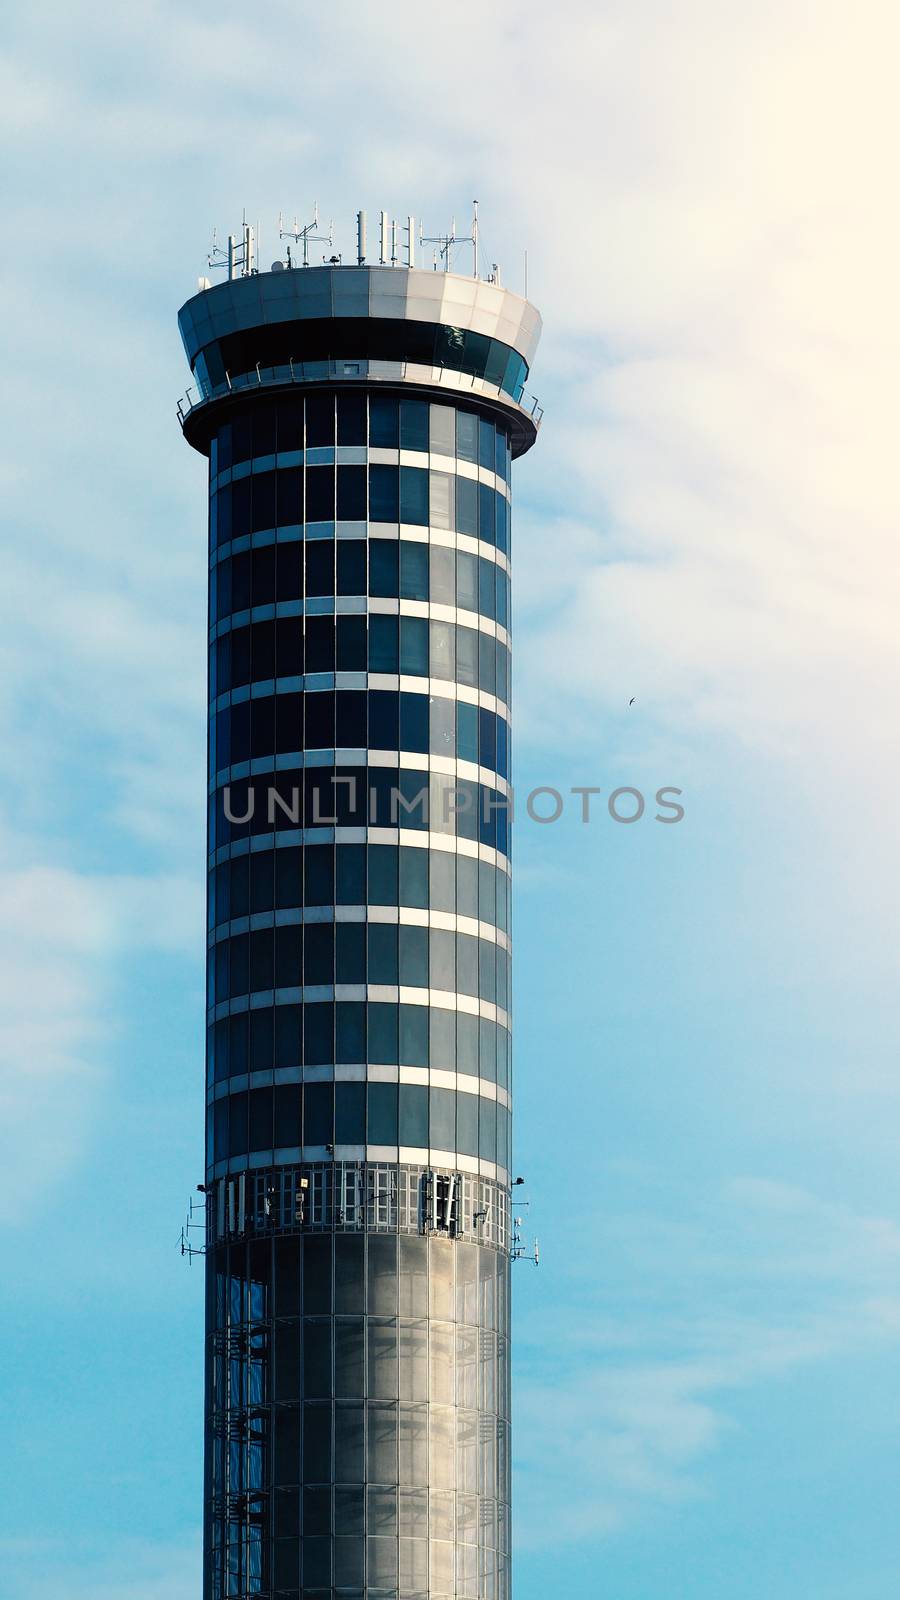 Air traffic contact center tower of airport Bangkok Thailand by gnepphoto